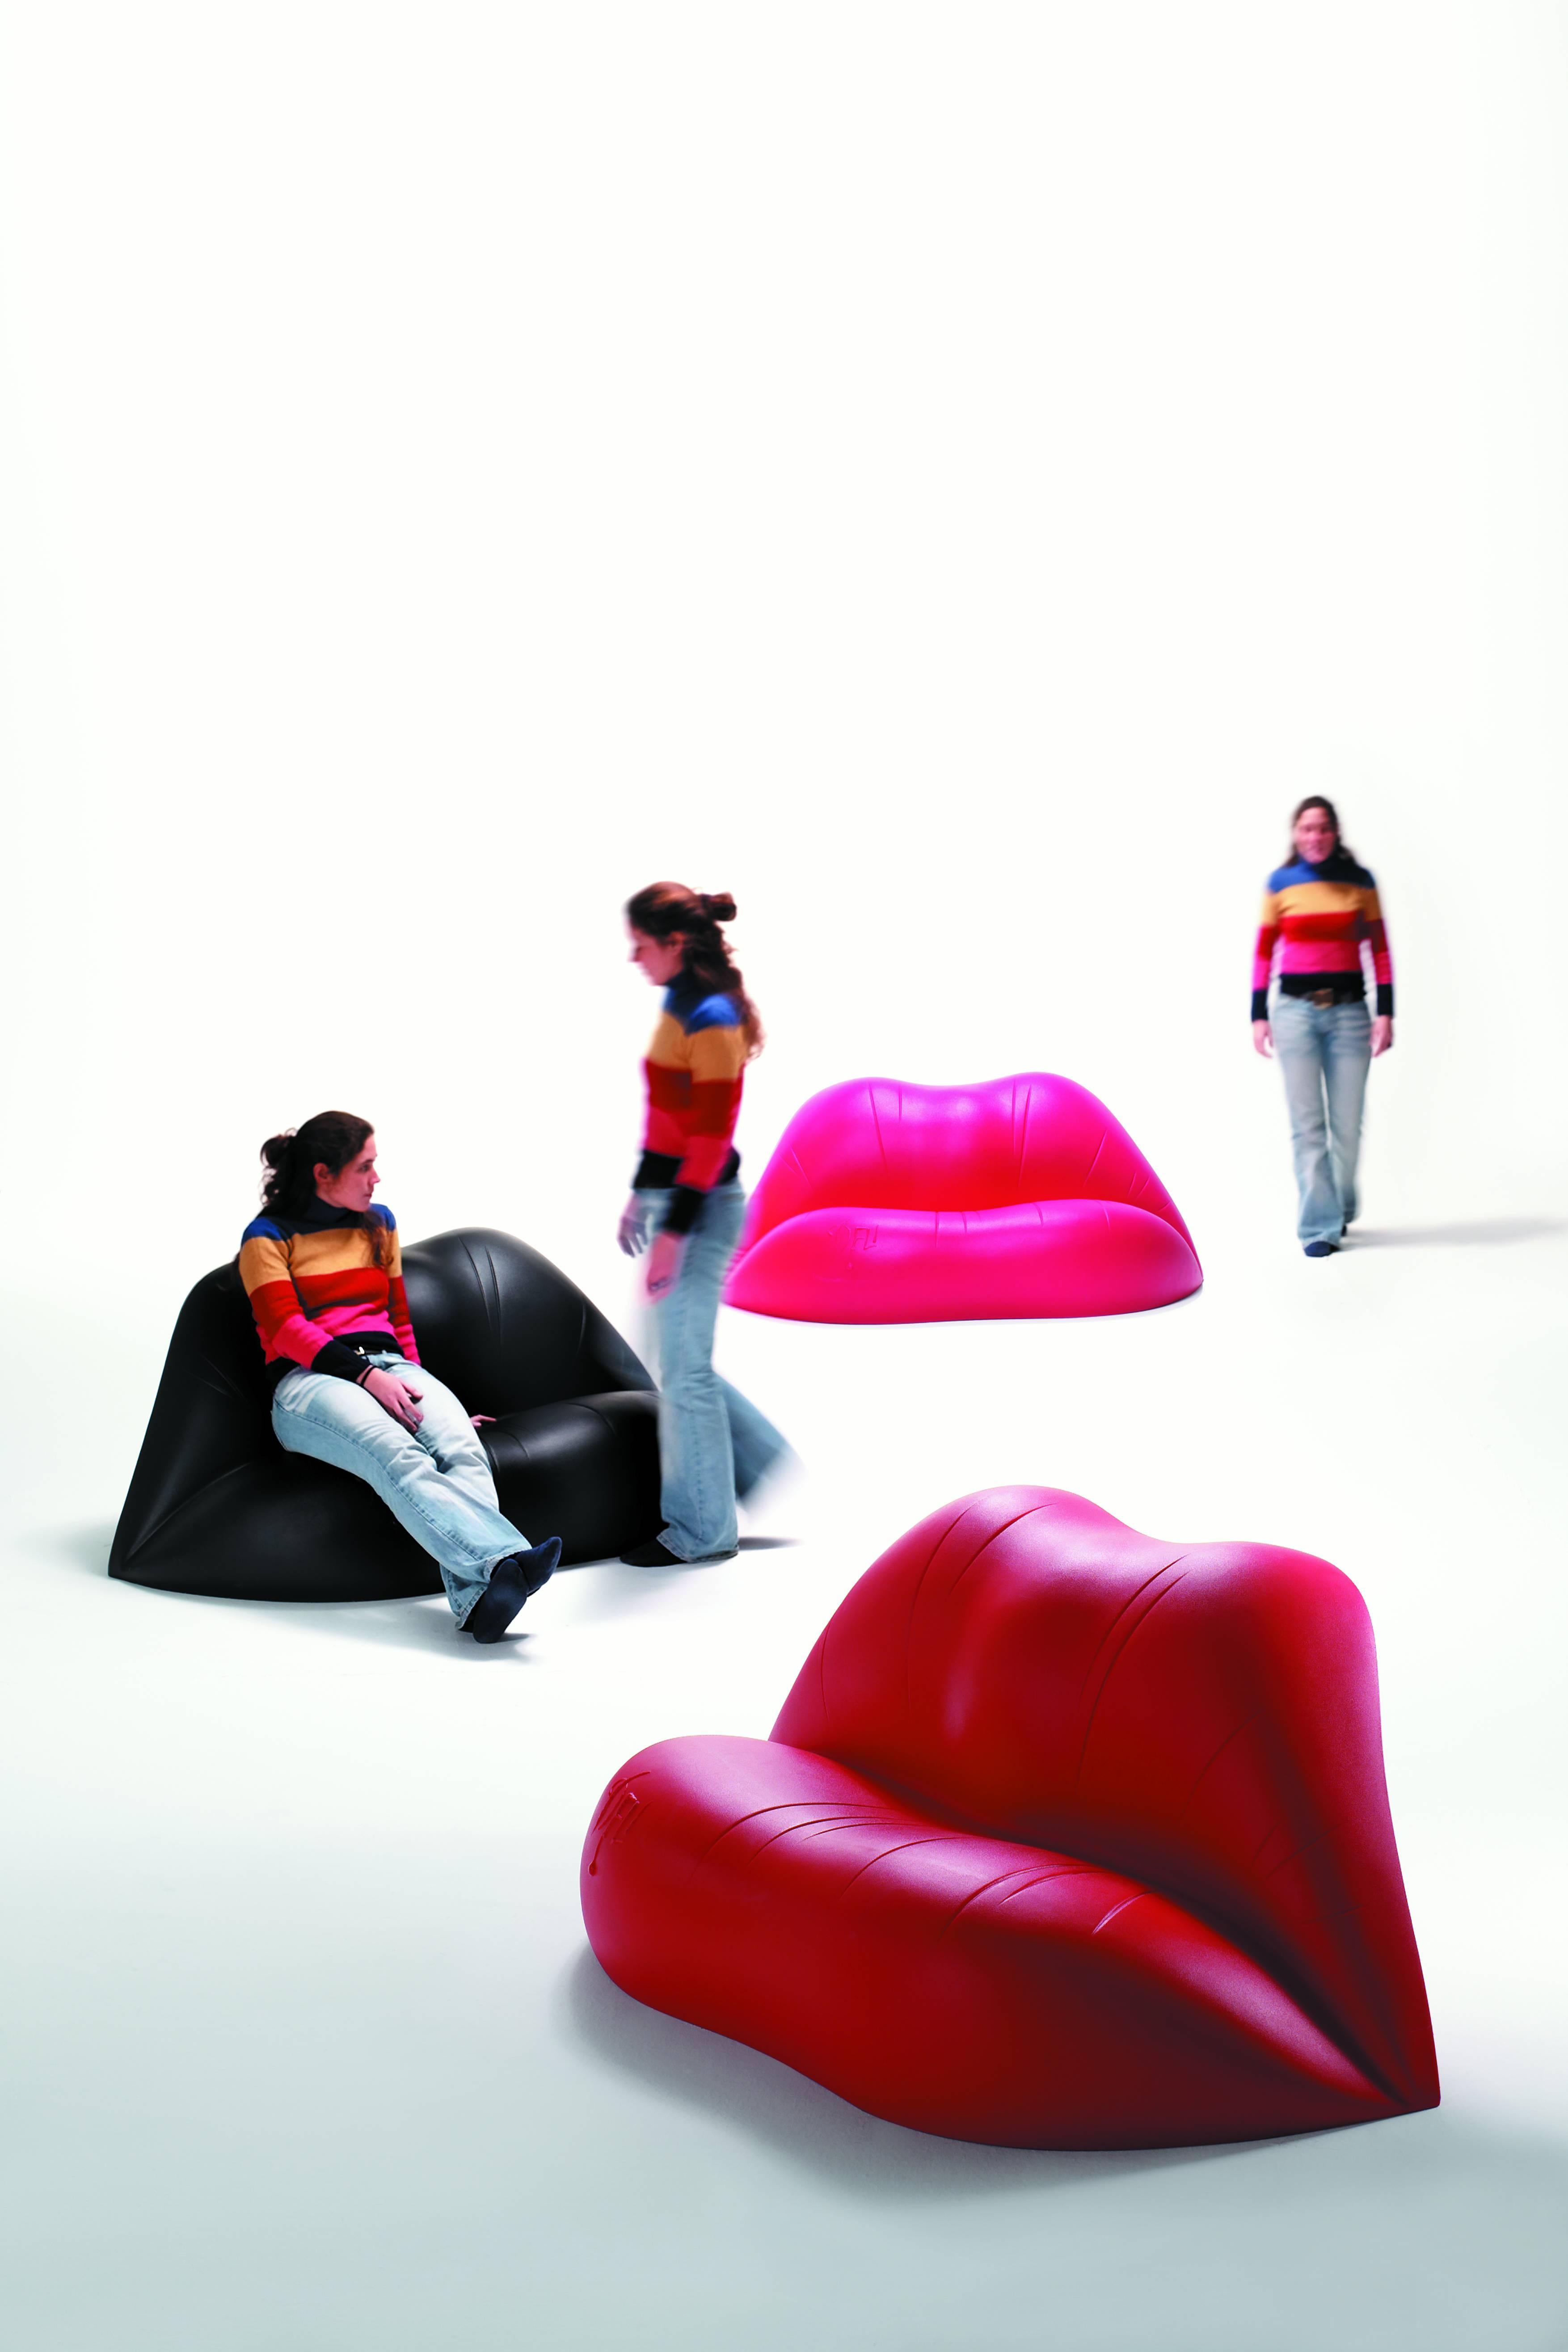 Dalilips is the famous sofa in the shape of a mouth which Salvador Dalí created together with Oscar Tusquets in 1972 for the Mae West room at the Dalí Museum in Figueres. Manufactured by BD Barcelona.

Thanks to polyethylene rotational moulding